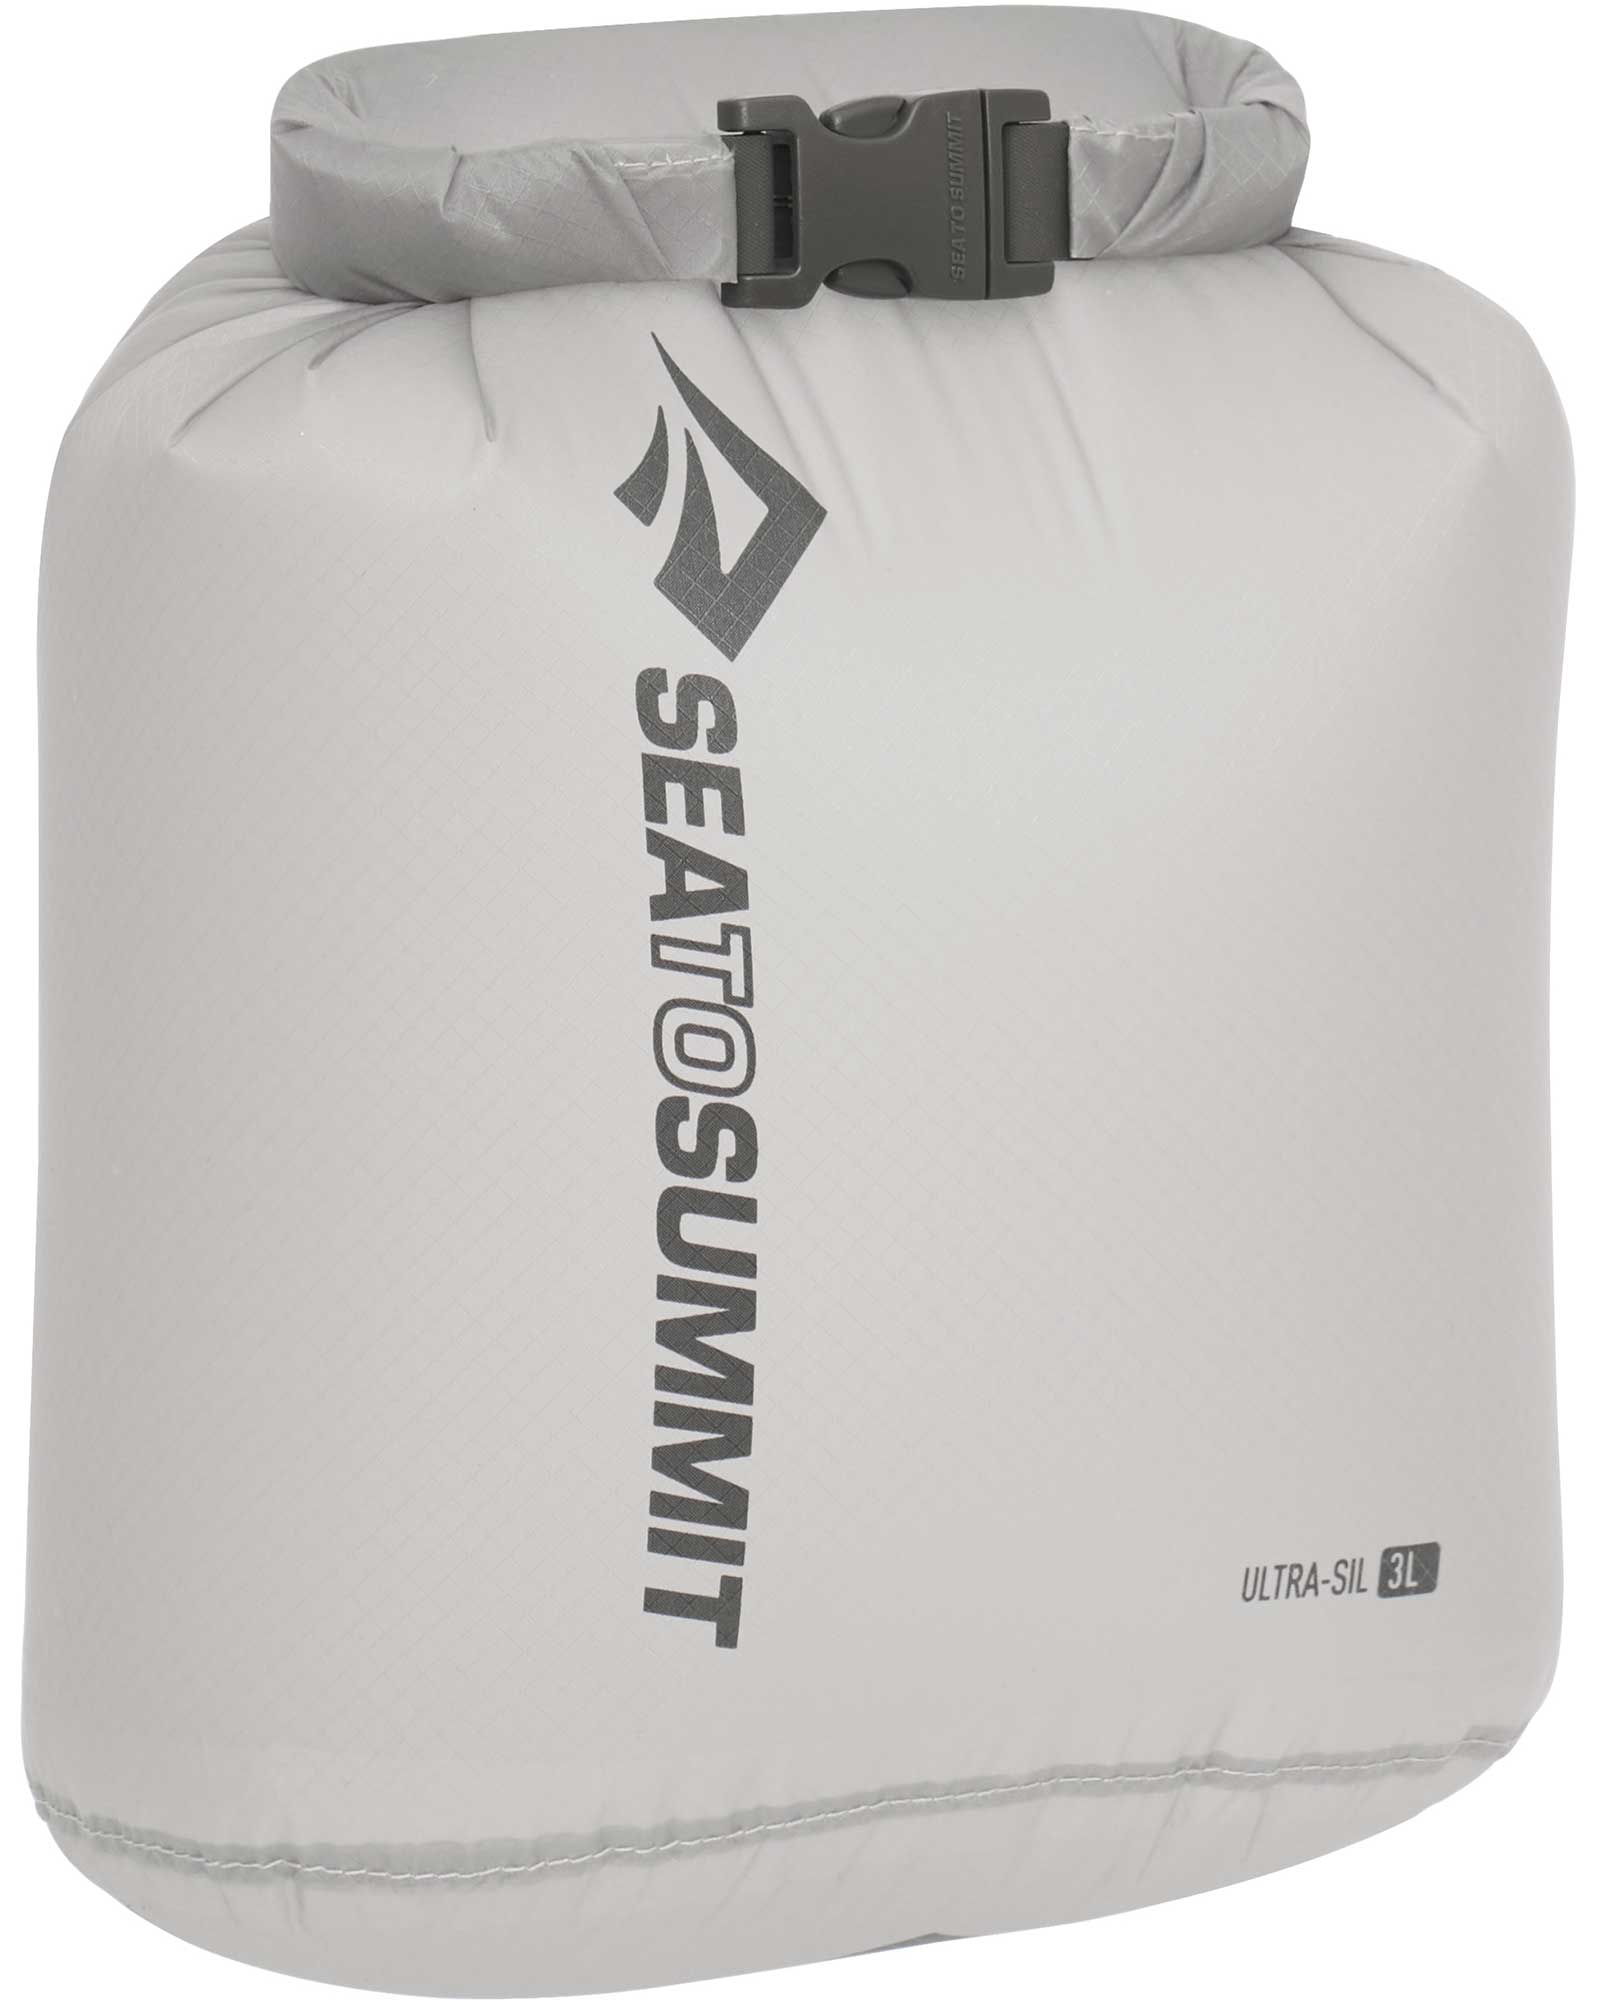 Sea To Summit Ultra-sil Dry Bag 3l Dry Bags